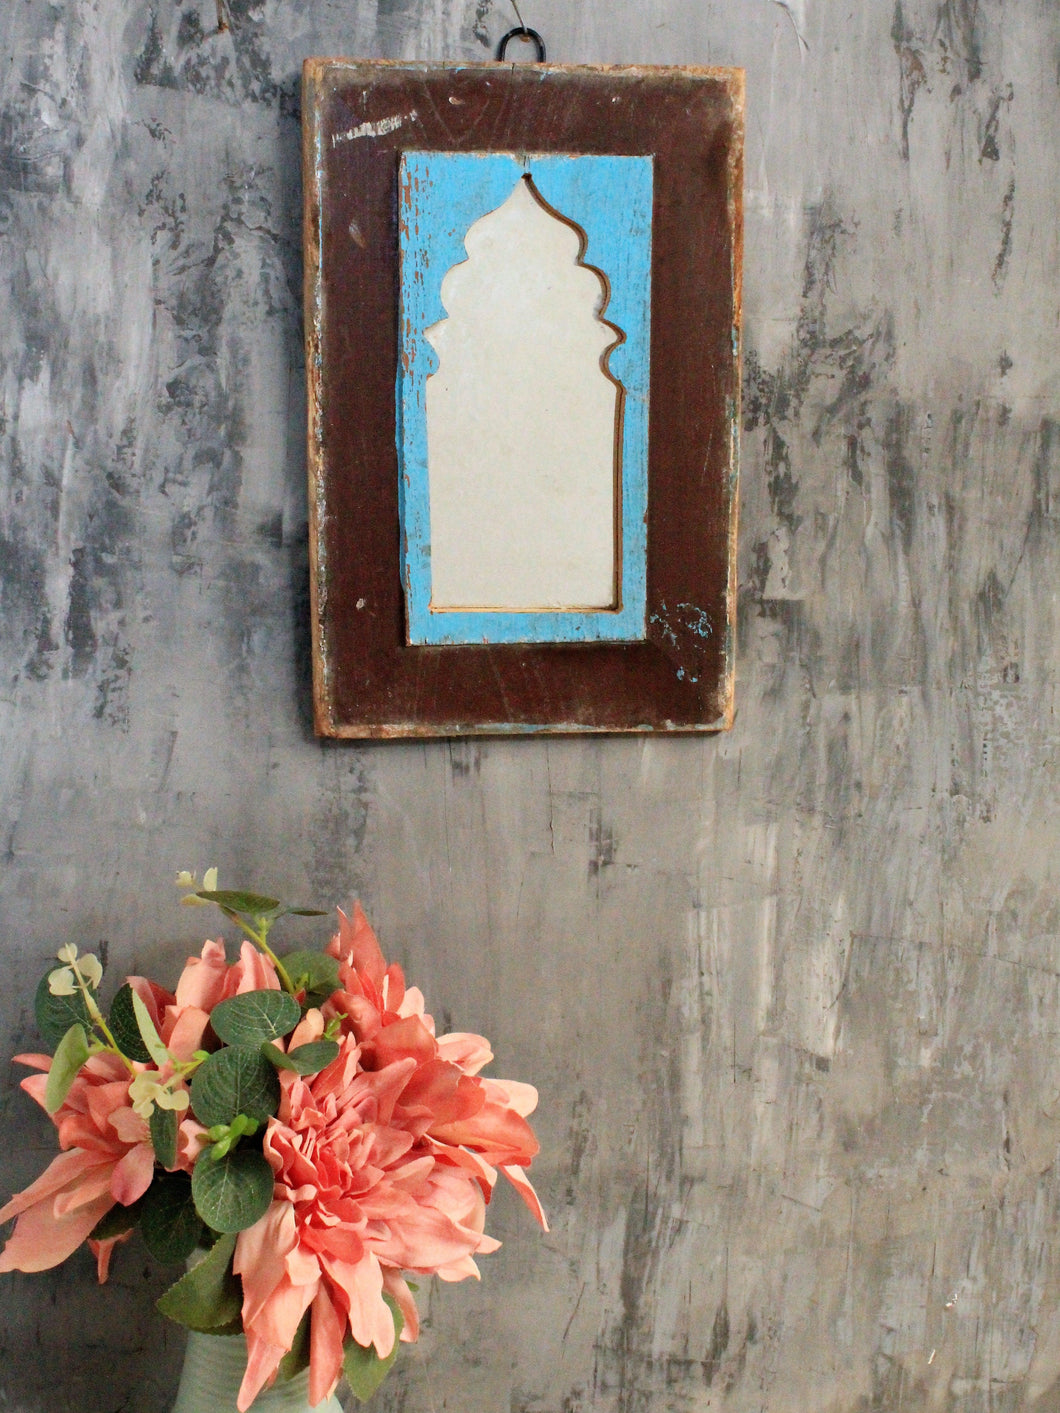 Wooden Distressed Mehraab Mirror Frame made from Vintage Window pane - Style It by Hanika